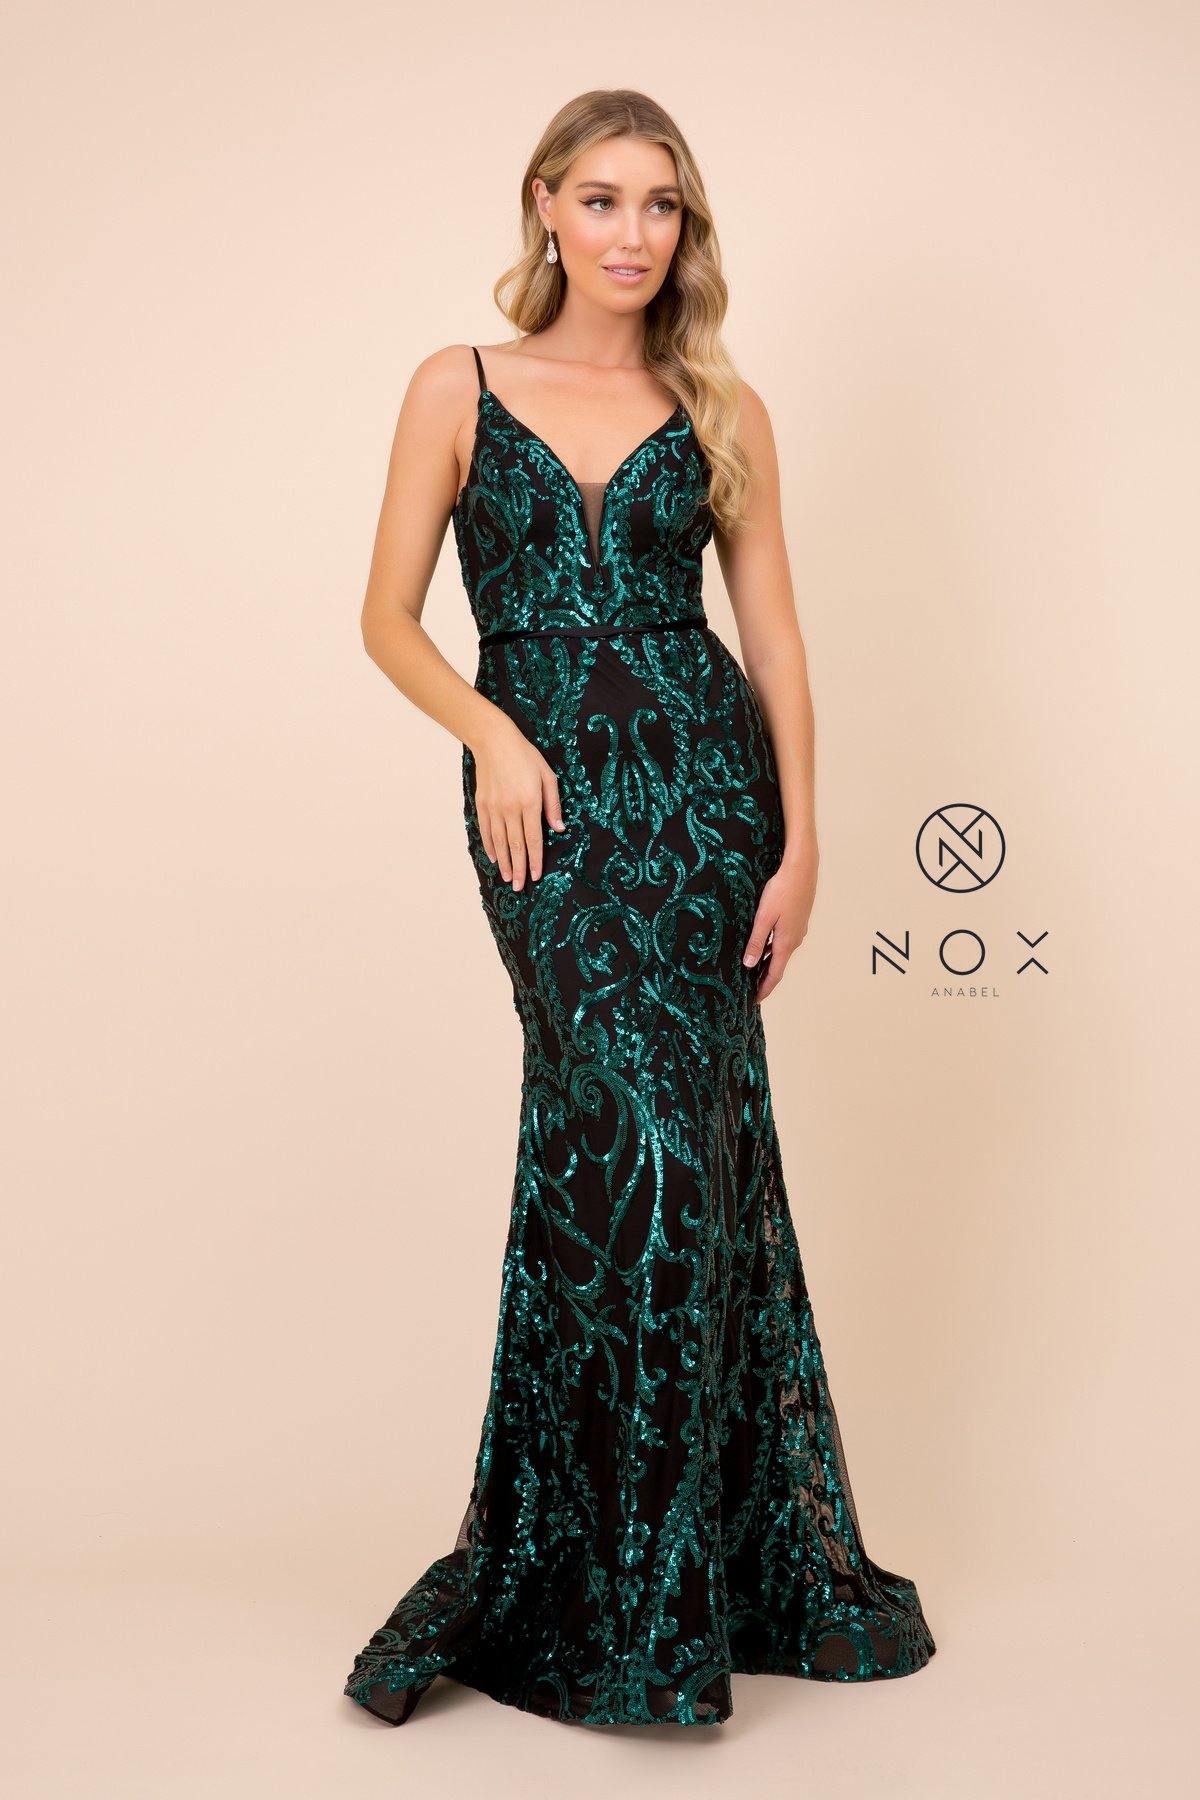 Long Formal Spaghetti Strap Sequin Print Prom Dress - The Dress Outlet Nox Anabel